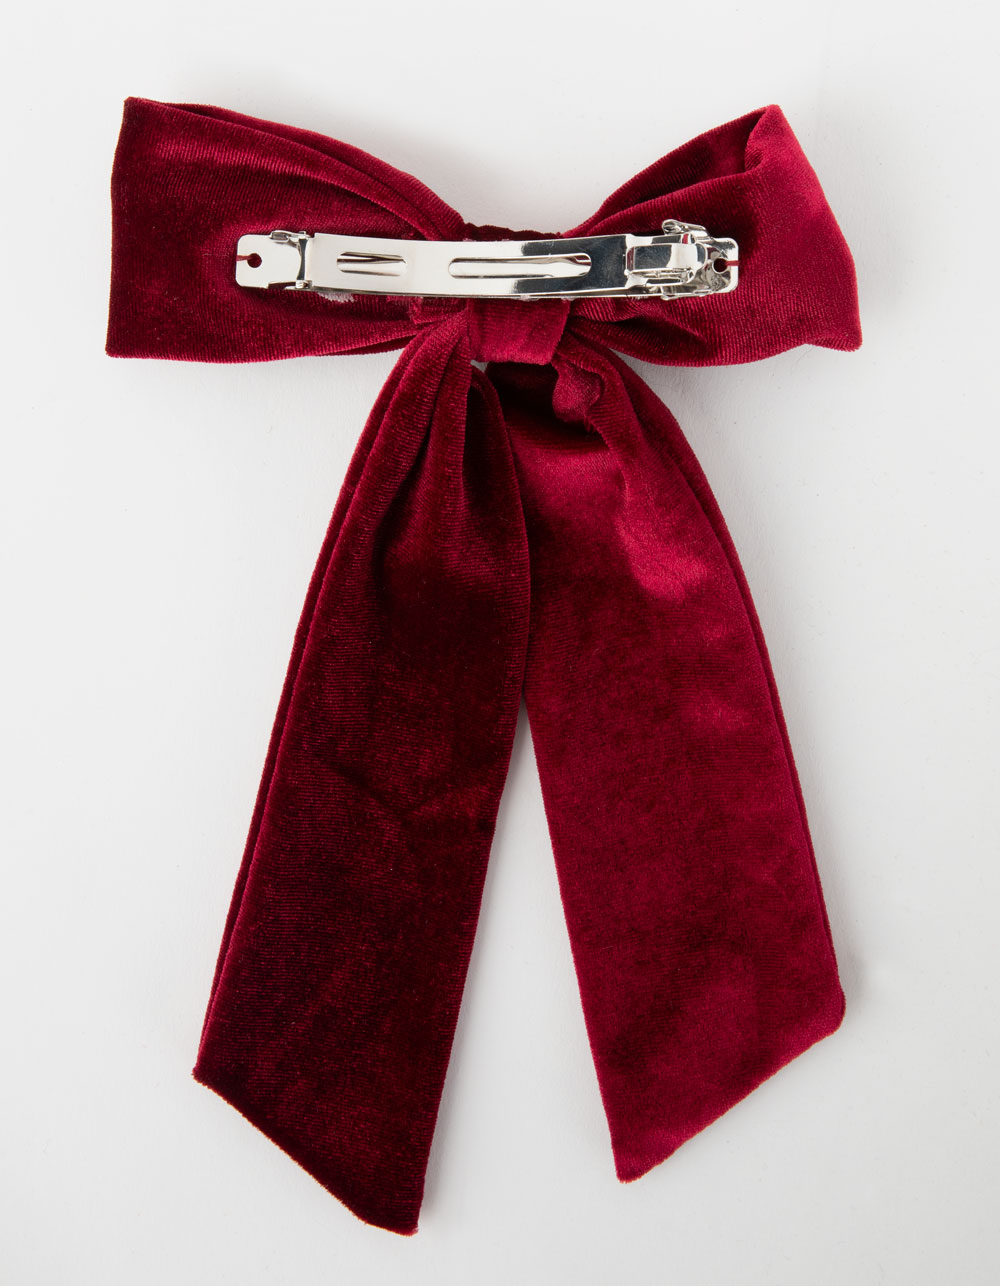 1pc Women's Red Accessory Velvet Retro And Elegant Style Double-layer Bow  Hair Scrunchie For Ponytail Or Bun. Suitable For Daily Travel, Office  Commute, Vacation, Autumn And Winter Seasons And Any Occasion.